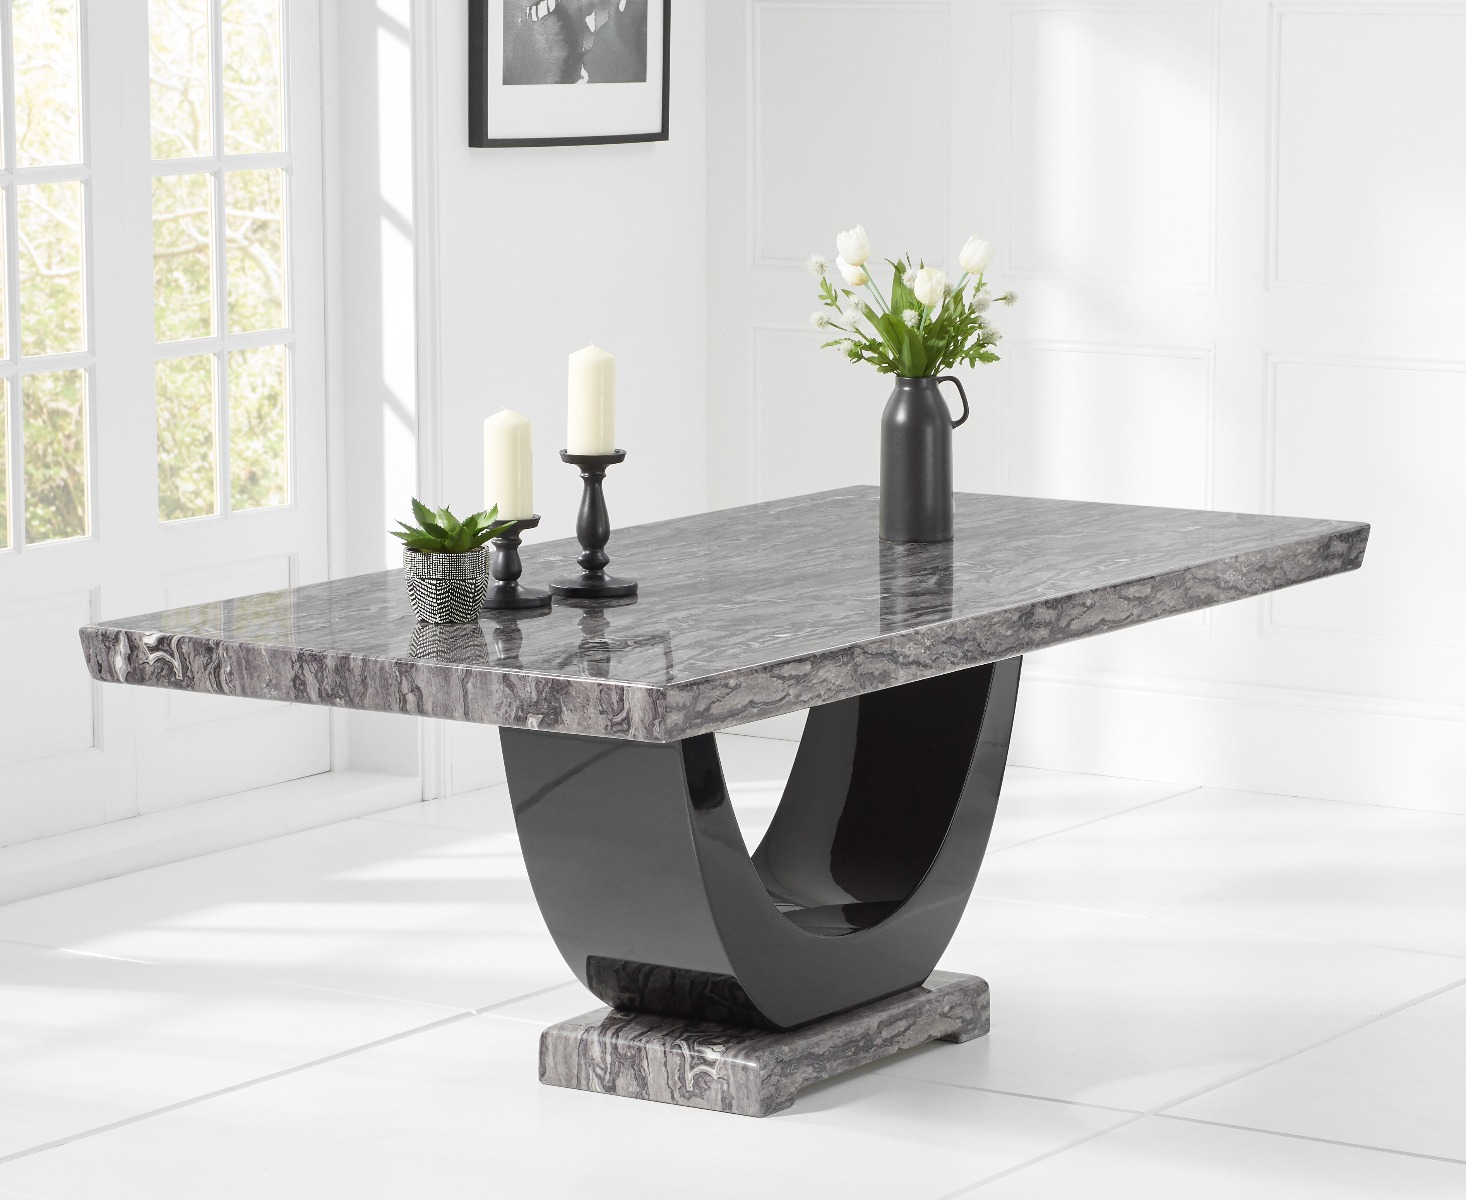 Photo 2 of Raphael 200cm dark grey pedestal marble dining table with 10 grey sophia chairs